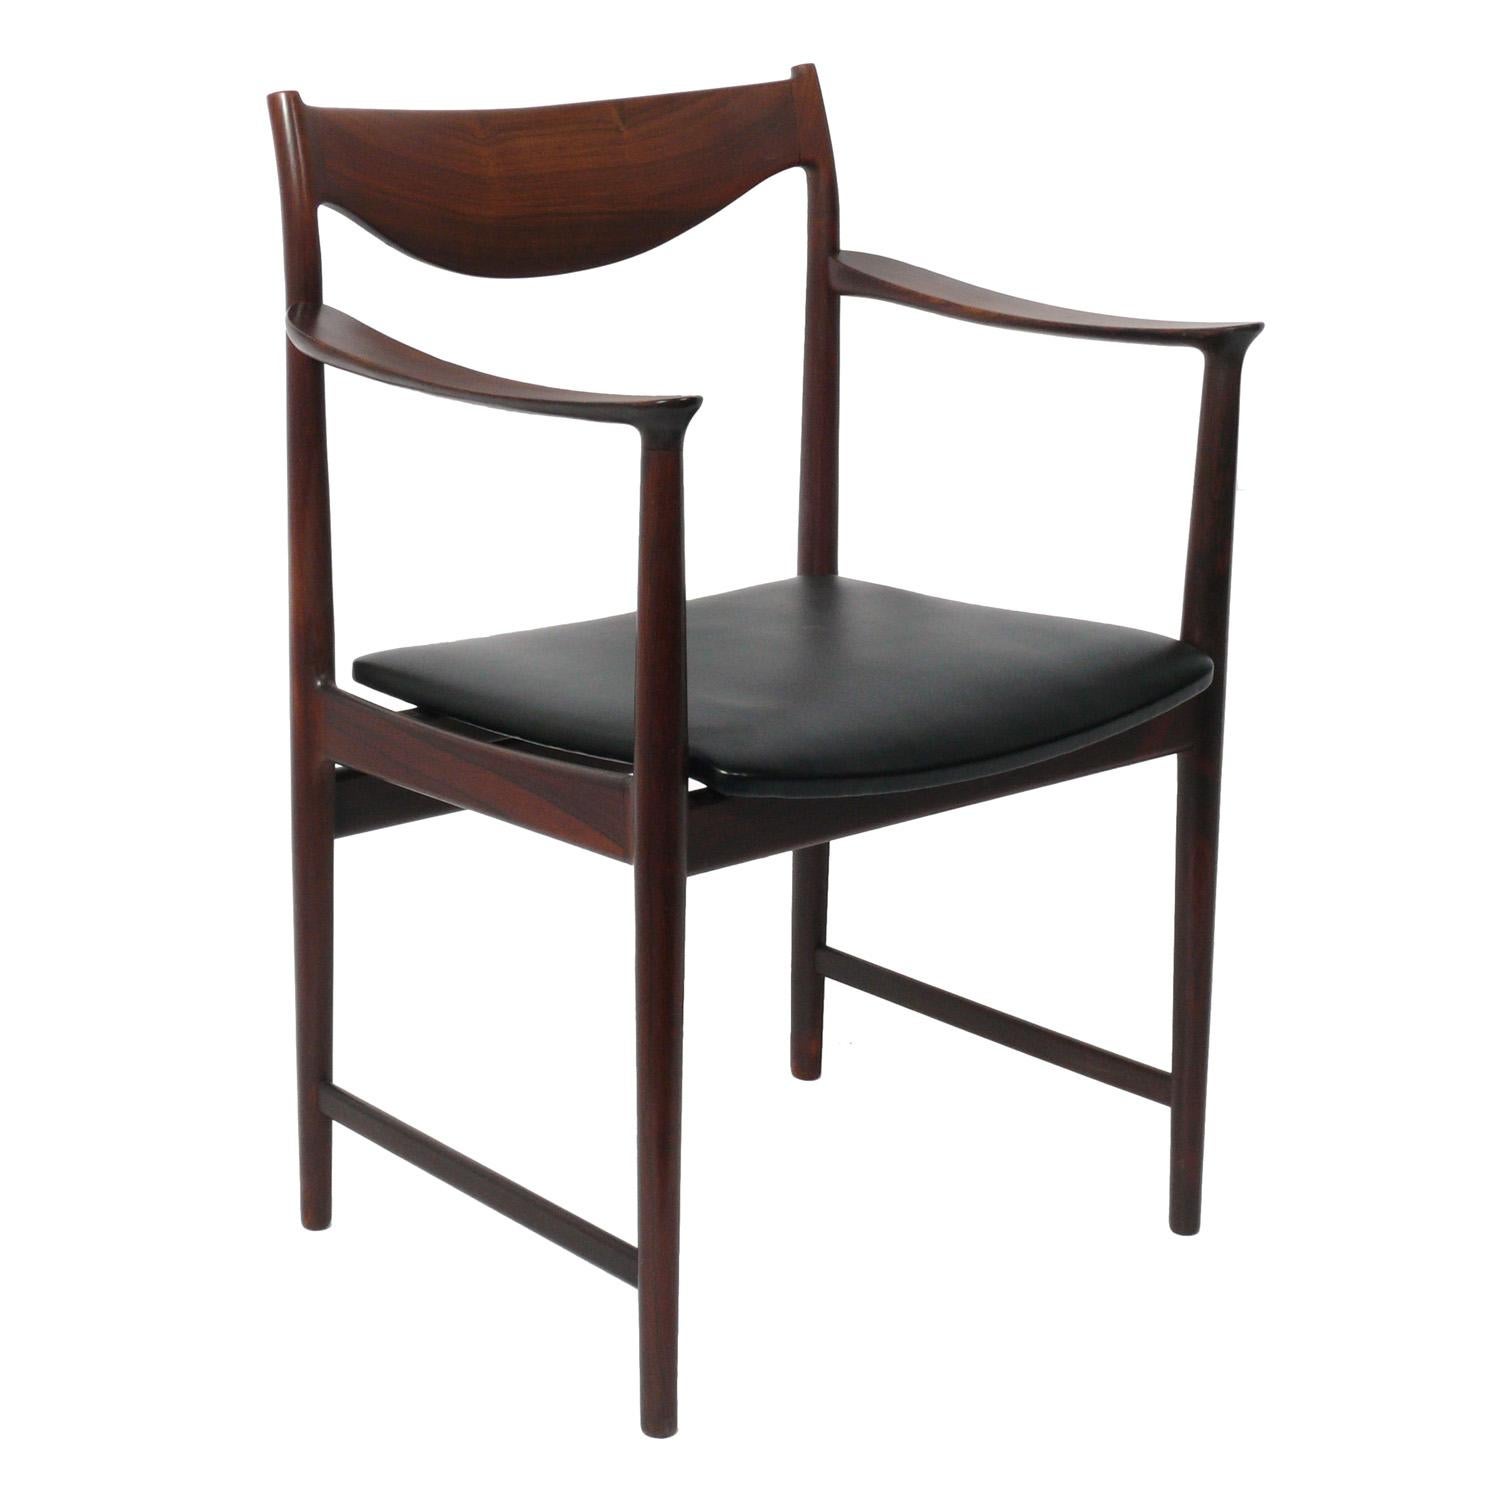 Norwegian Set of Eight Danish Modern Rosewood Dining Chairs designed by Torbjorn Afdal